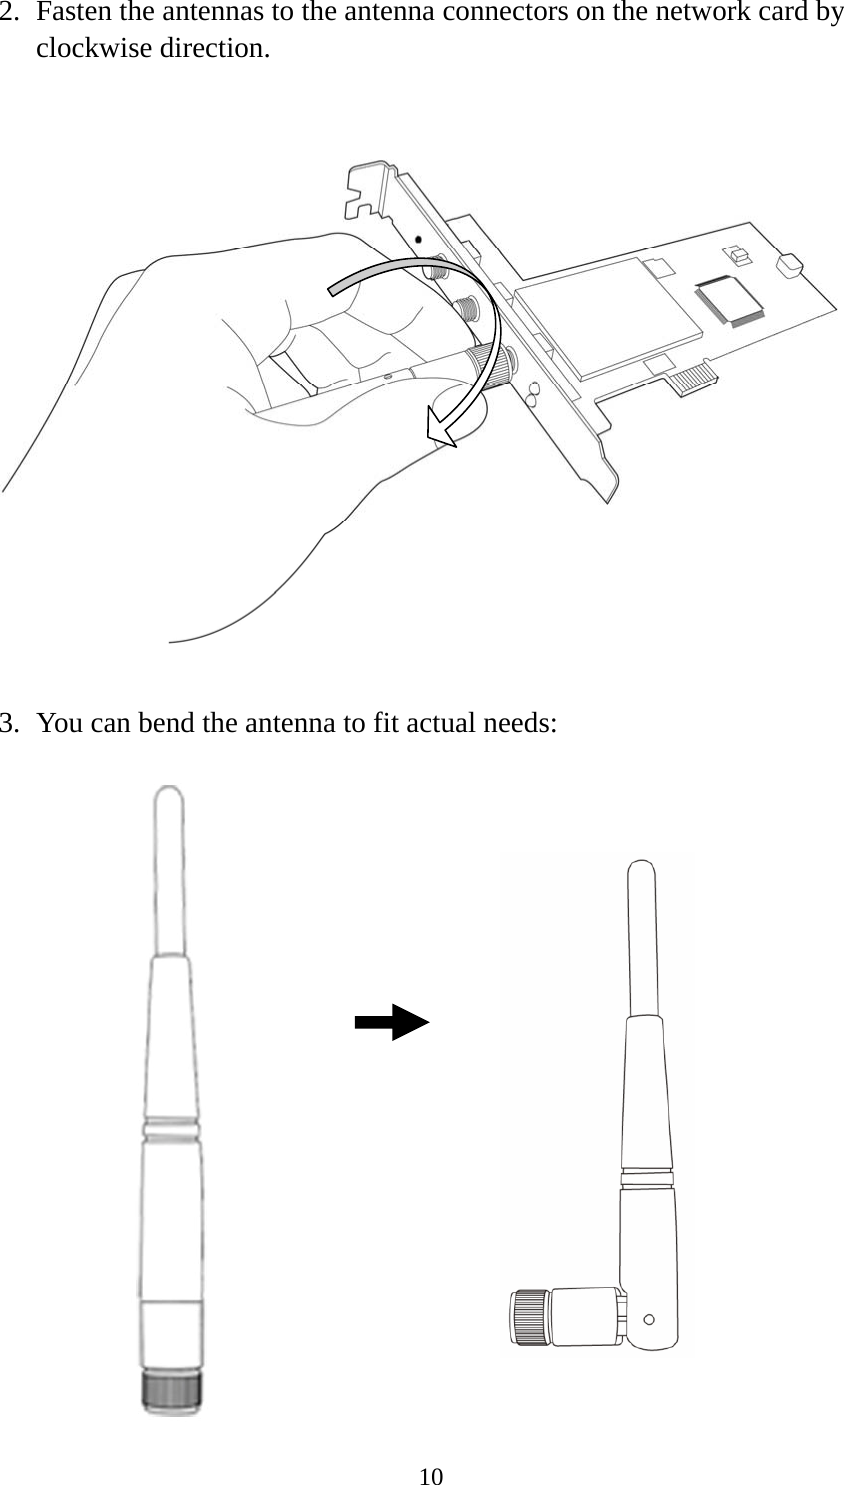  102. Fasten the antennas to the antenna connectors on the network card by clockwise direction.    3. You can bend the antenna to fit actual needs:                   